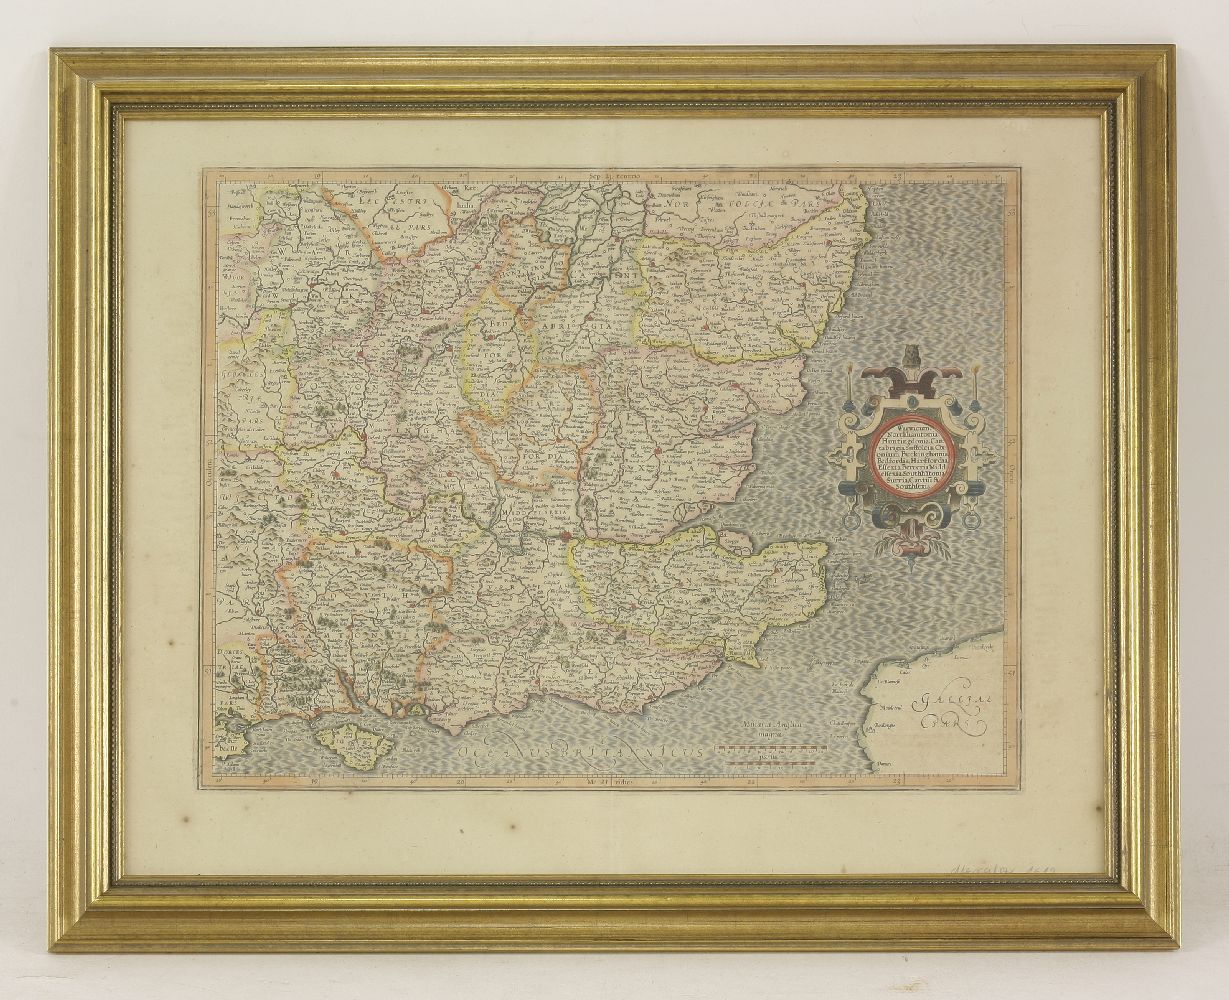 Mercator's map of South of England,Warwicum, Northamtonia, Huntingdonia, etc, from an atlas with